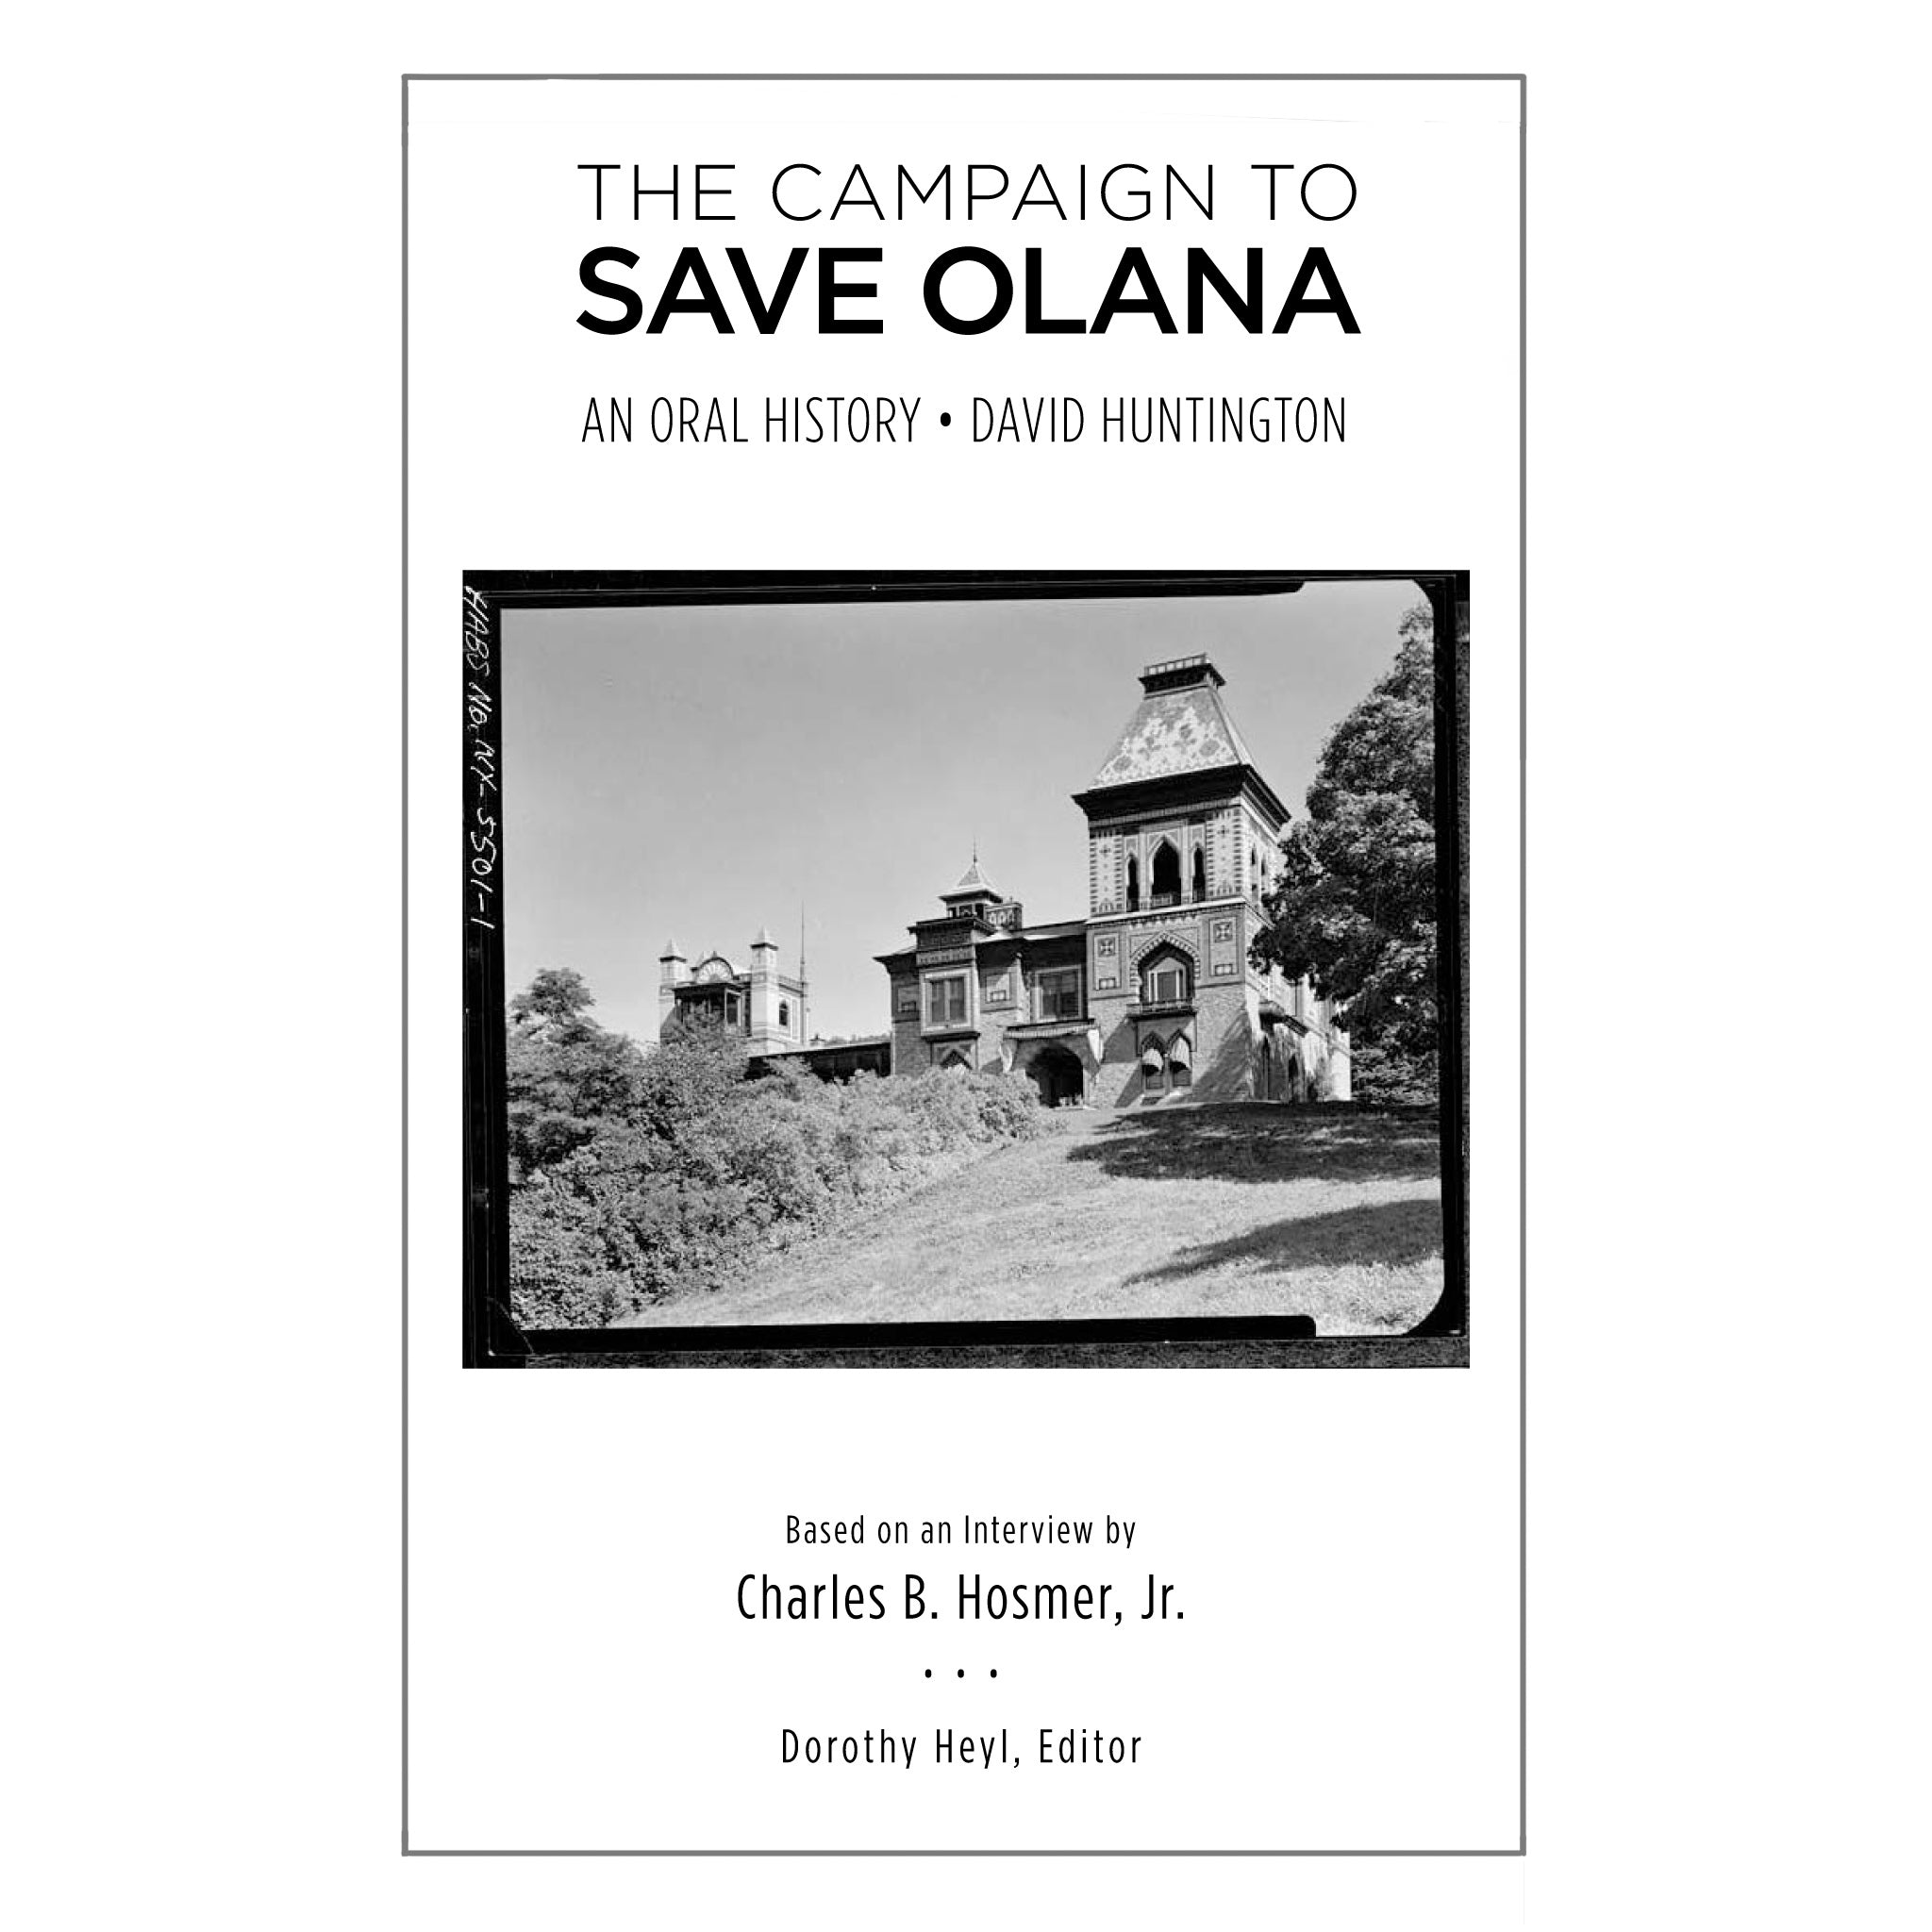 The Campaign to Save Olana